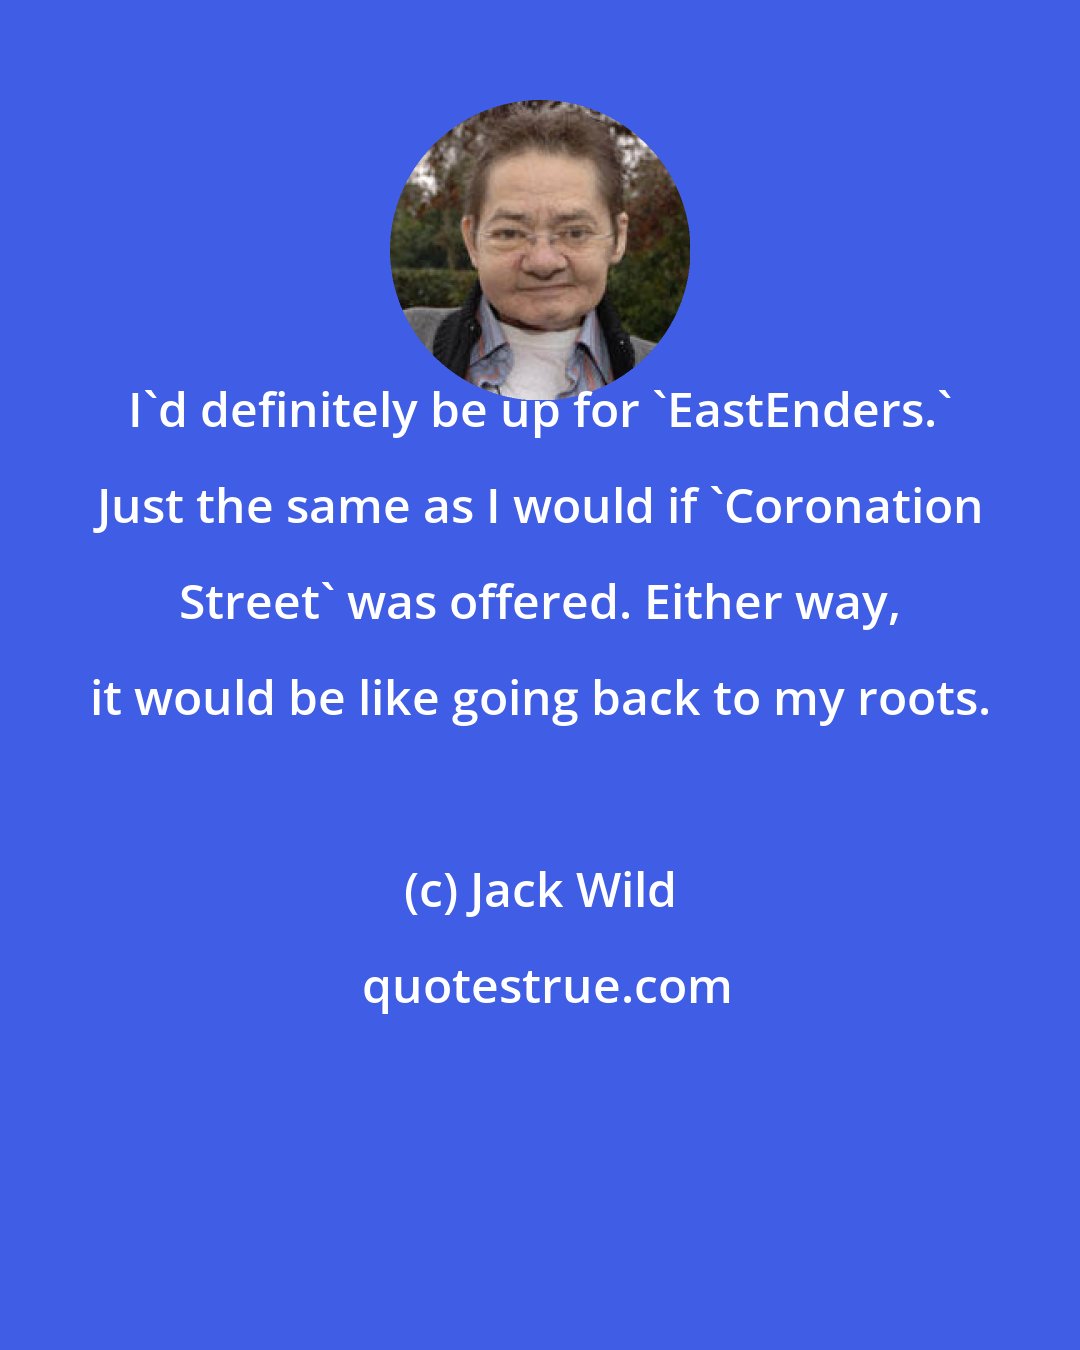 Jack Wild: I'd definitely be up for 'EastEnders.' Just the same as I would if 'Coronation Street' was offered. Either way, it would be like going back to my roots.